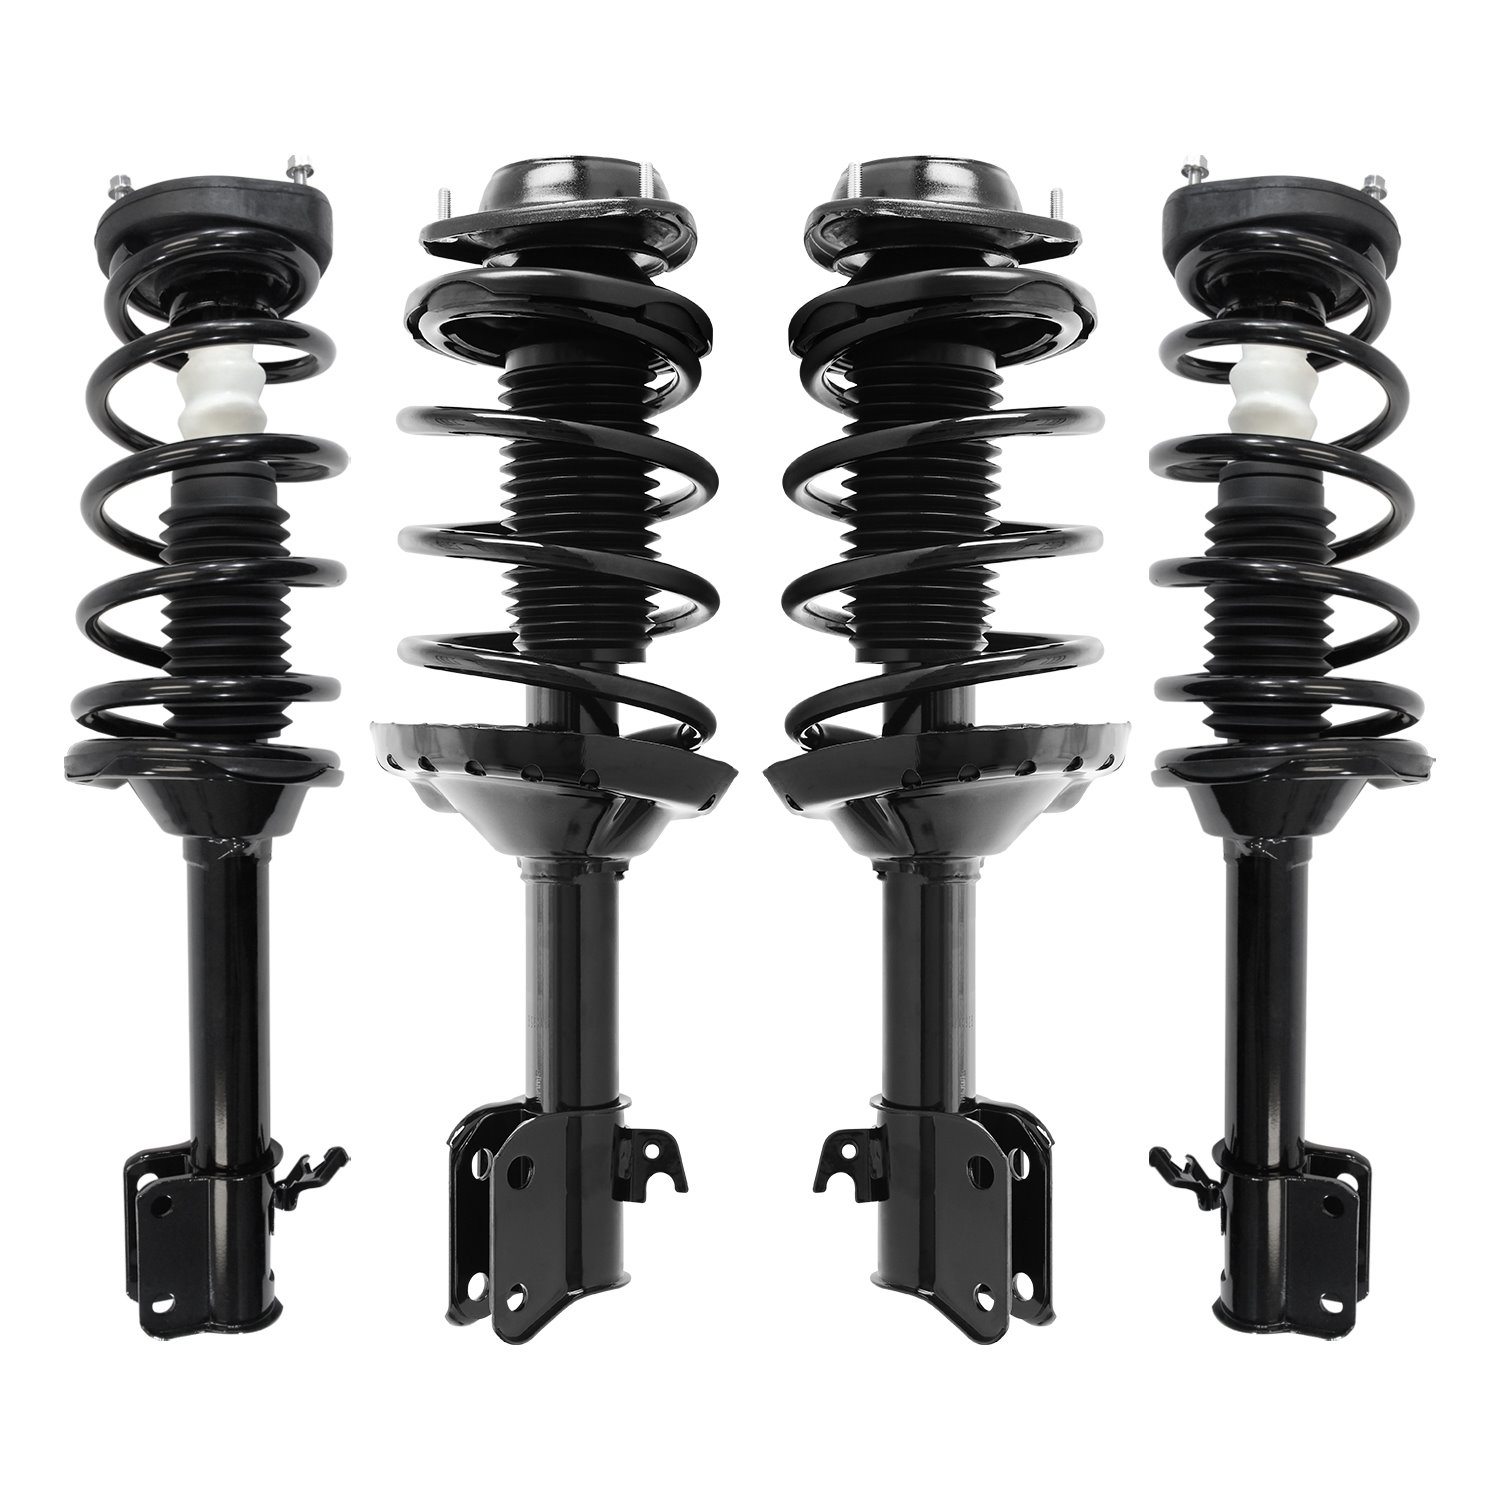 4-11925-15055-001 Front & Rear Suspension Strut & Coil Spring Assembly Kit Fits Select Subaru Forester